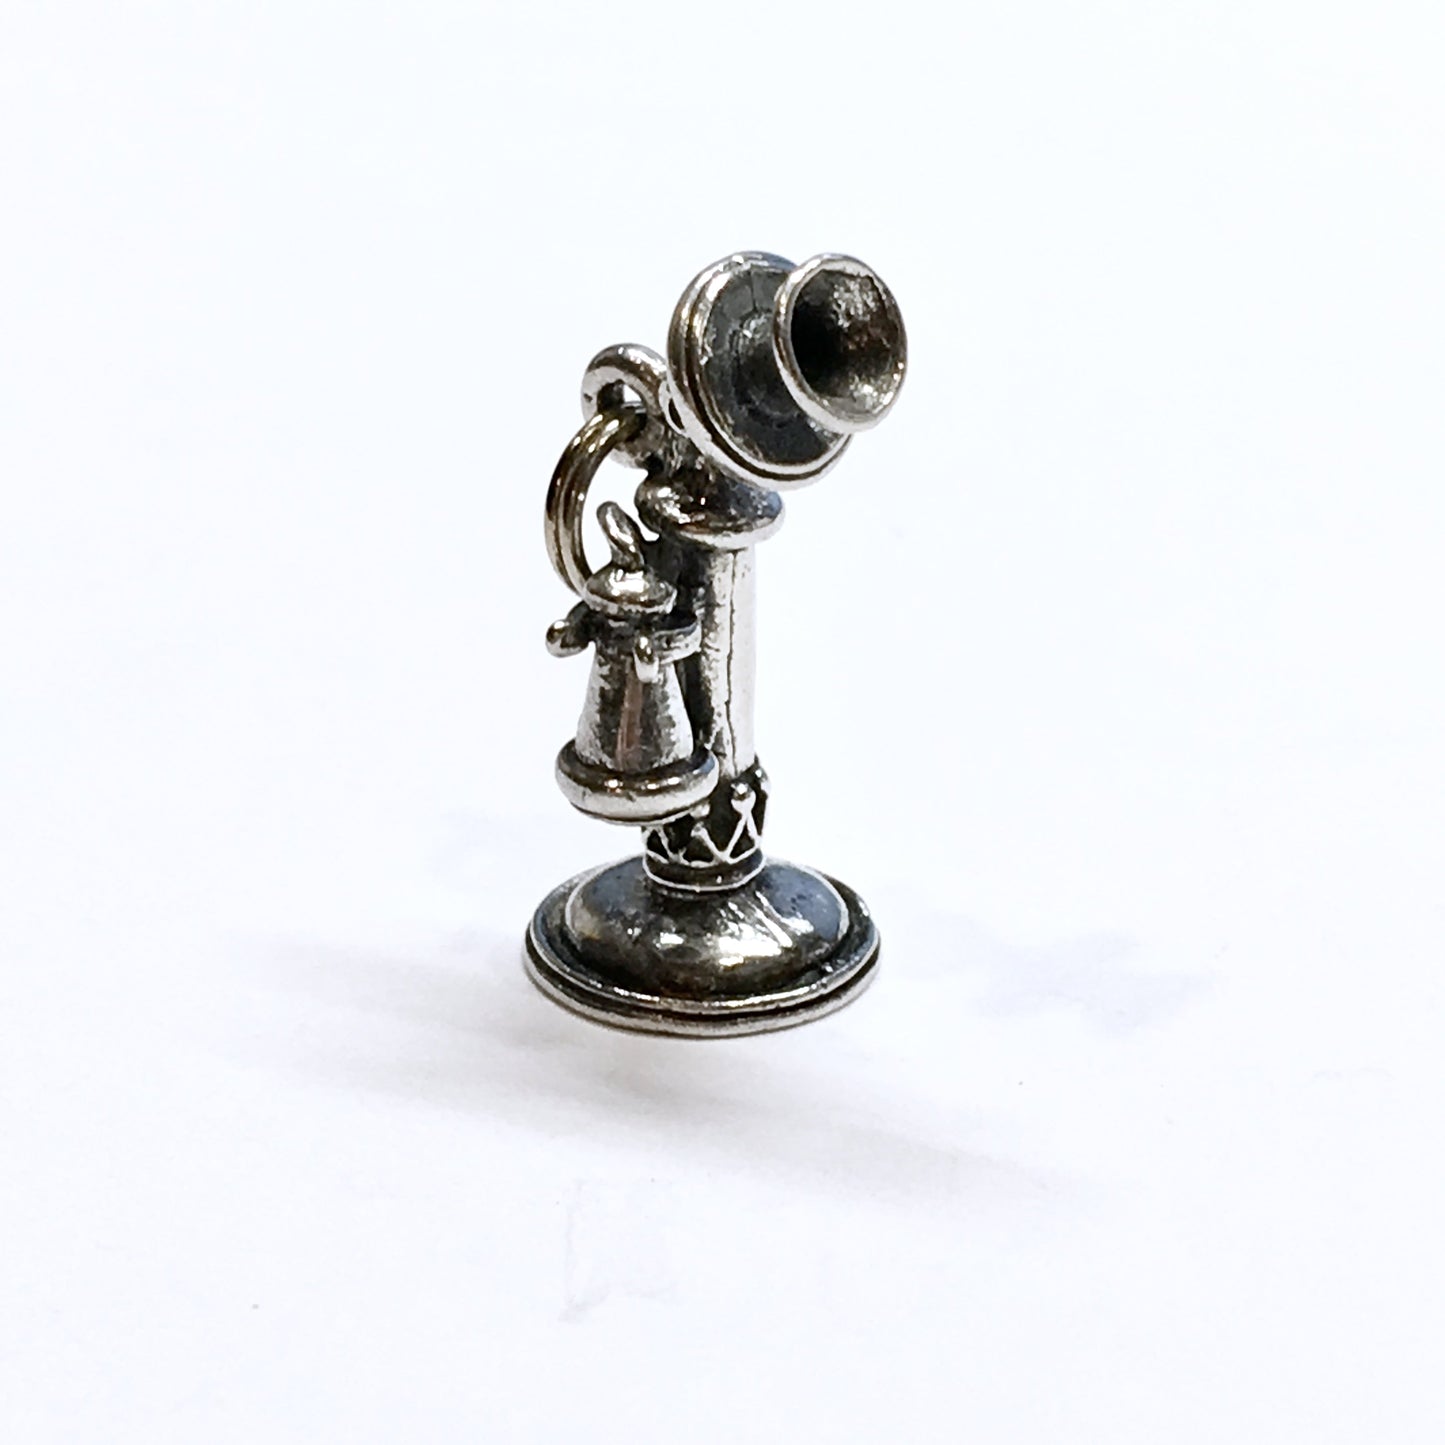 Thrifty Jewelry - Charms - Sterling Silver 3D  Stick Phone 3D Charm - Blingschlingers Jewelry